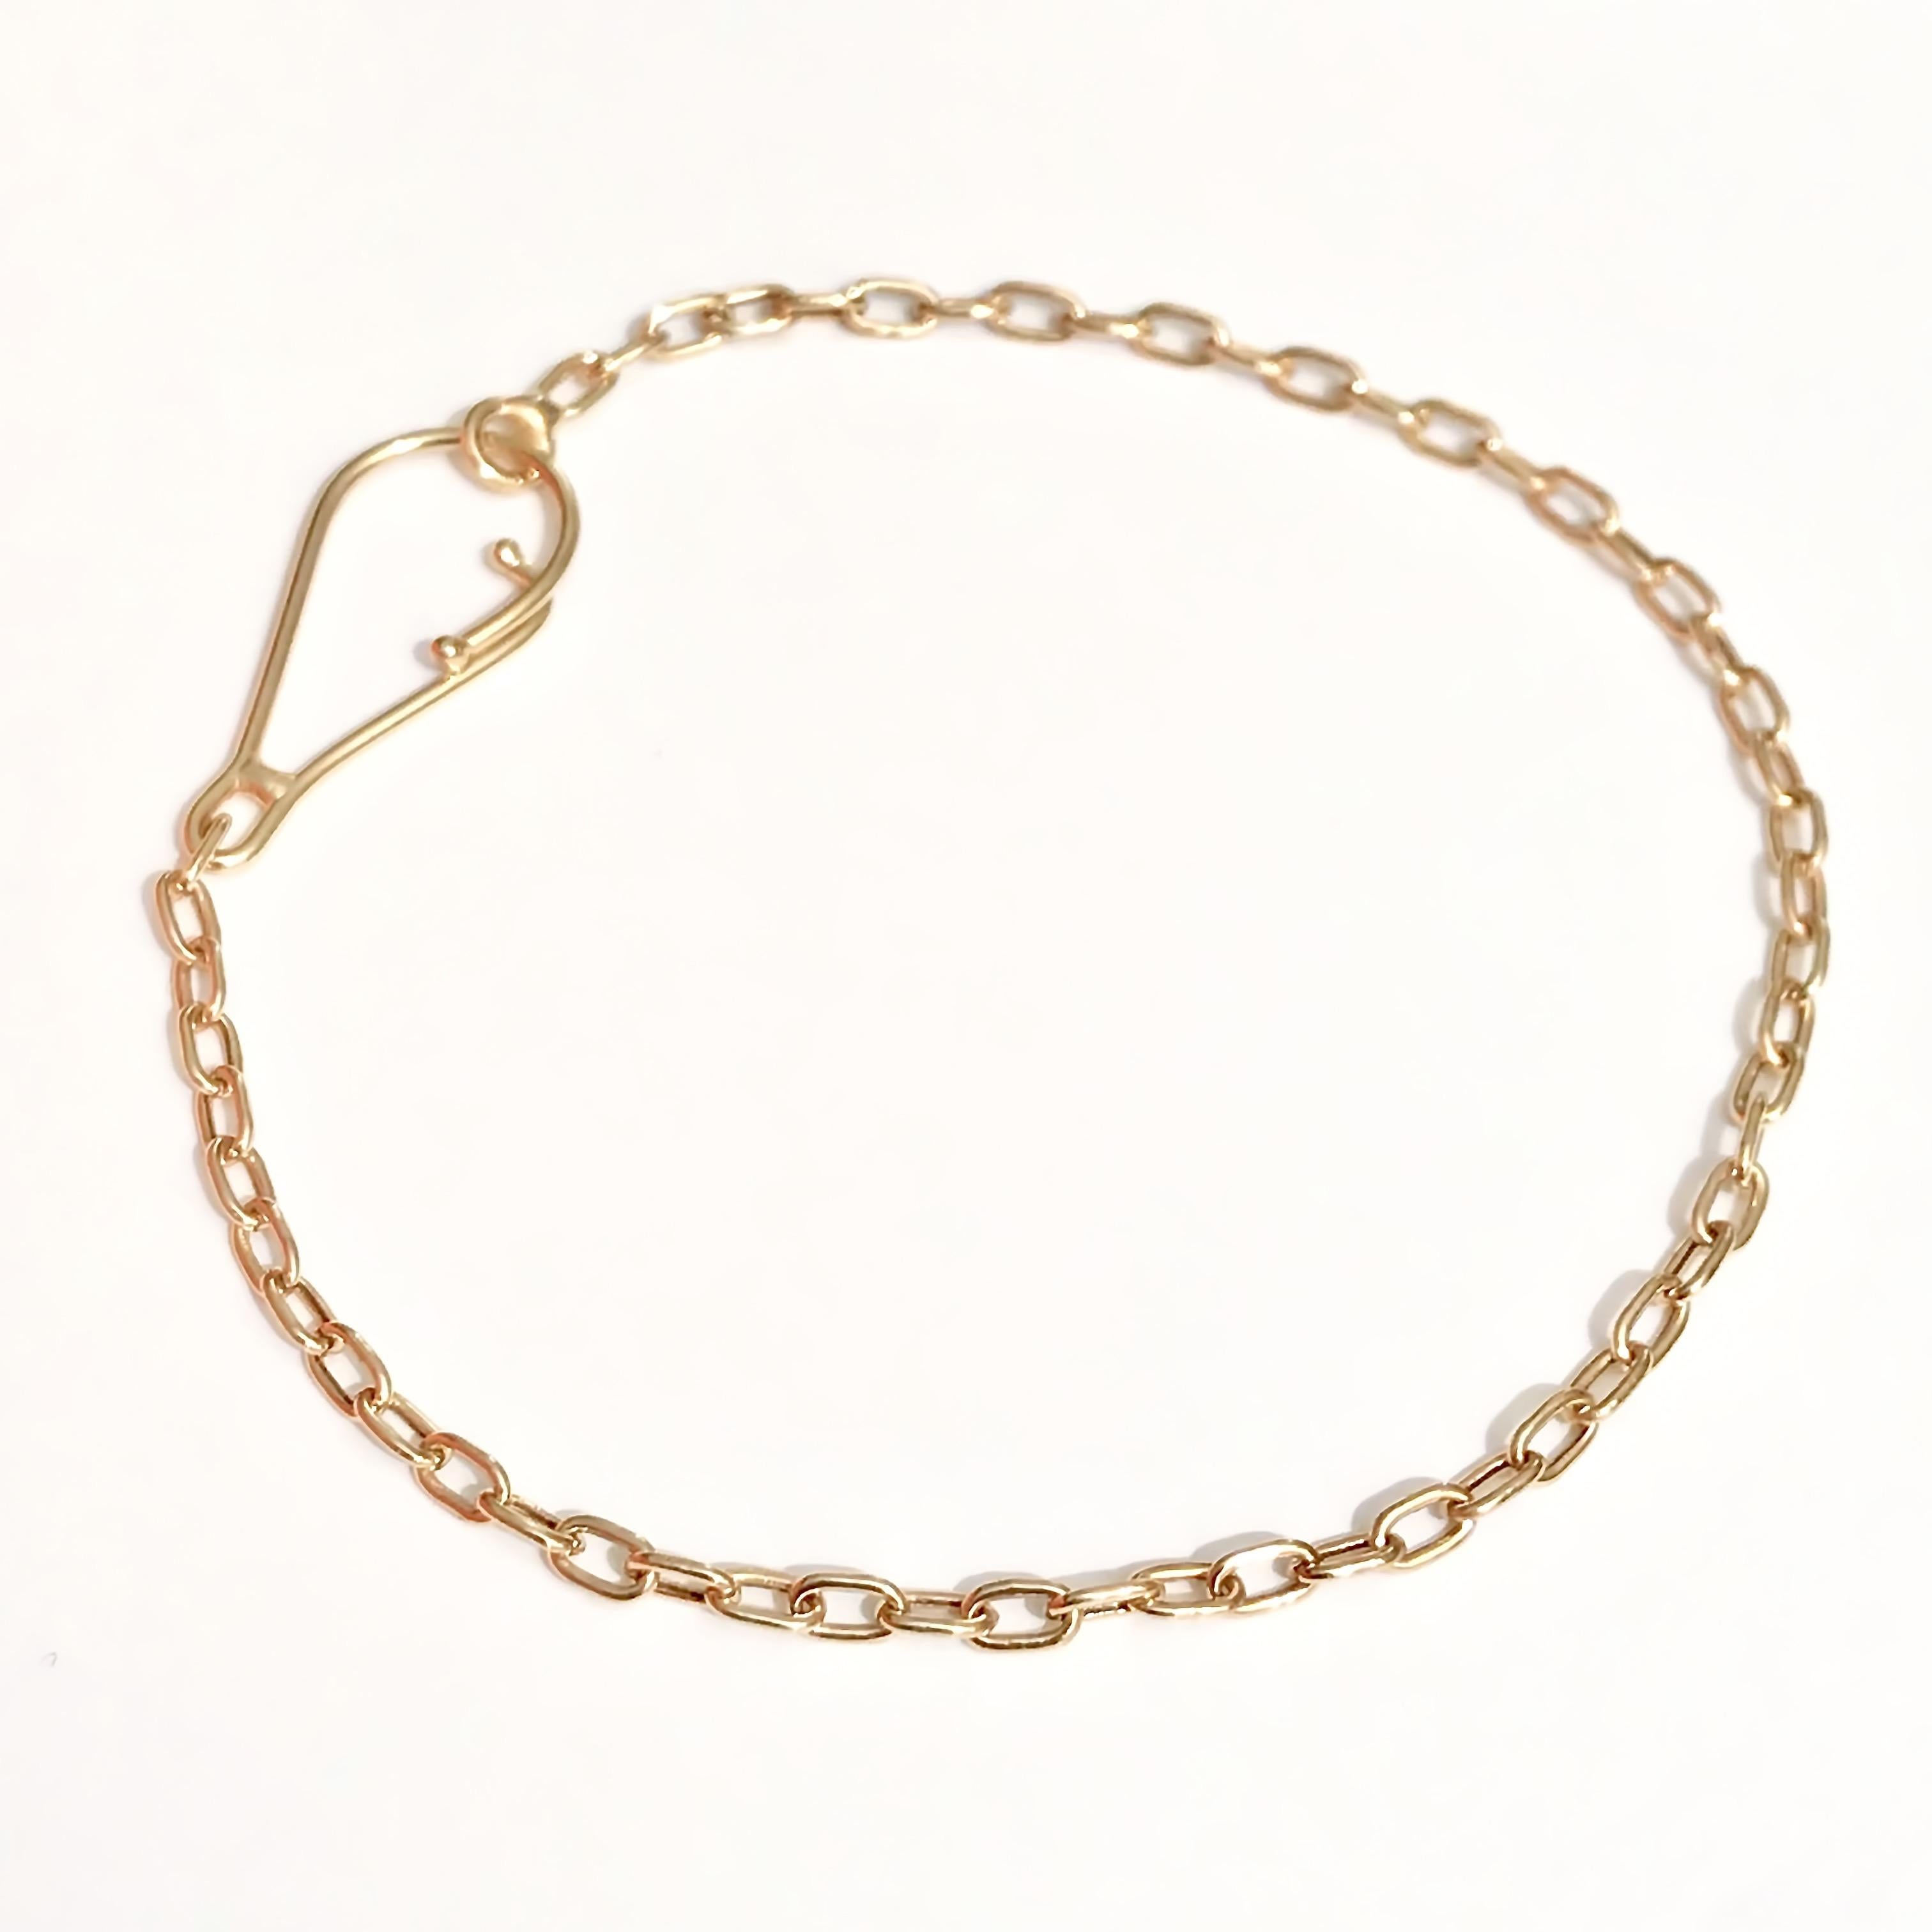 18 Karat yellow gold bracelet with a handmade designed secure clasp. 
Ideal to wear with other bracelets, charms or just itself.
Hallmark: London’s  Goldsmiths’ Company –  Assay Office ( laser mark on the clasp ) 
Length: 18.50cm
Gauge:  2.30mm

You